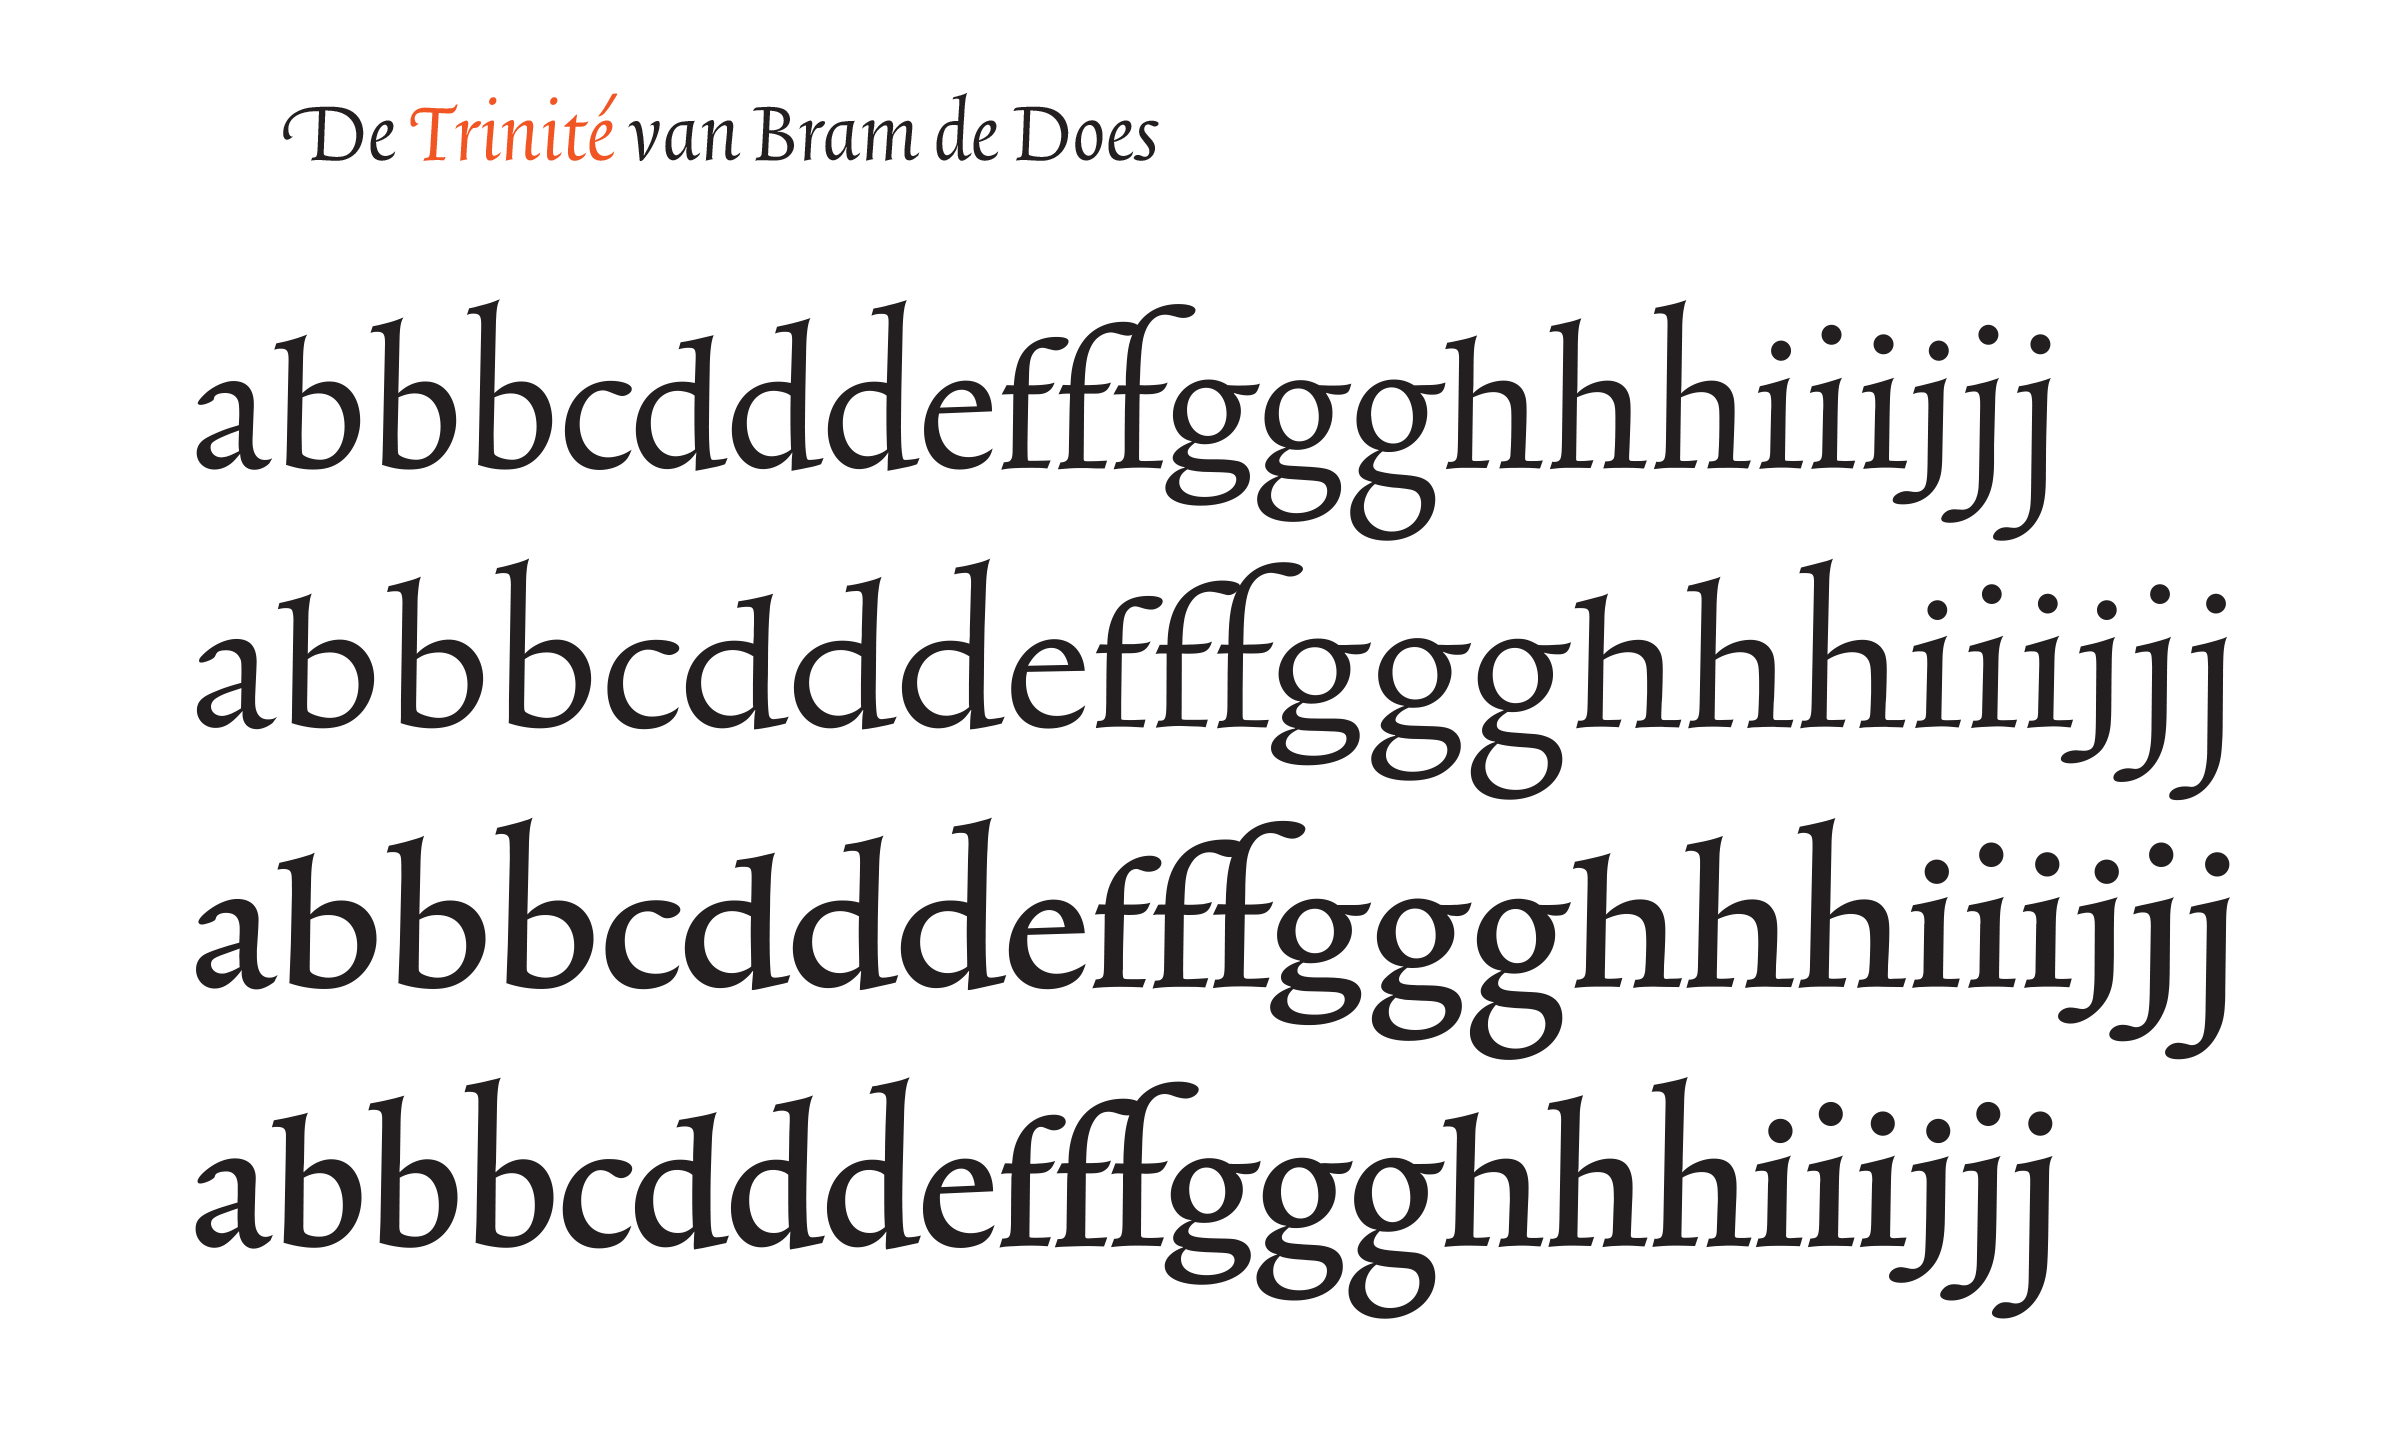 Specimen by Peter Matthias Noordzij, showing the Regular and Medium weights of Trinité in normal and condensed widths, with their three different stem lengths.